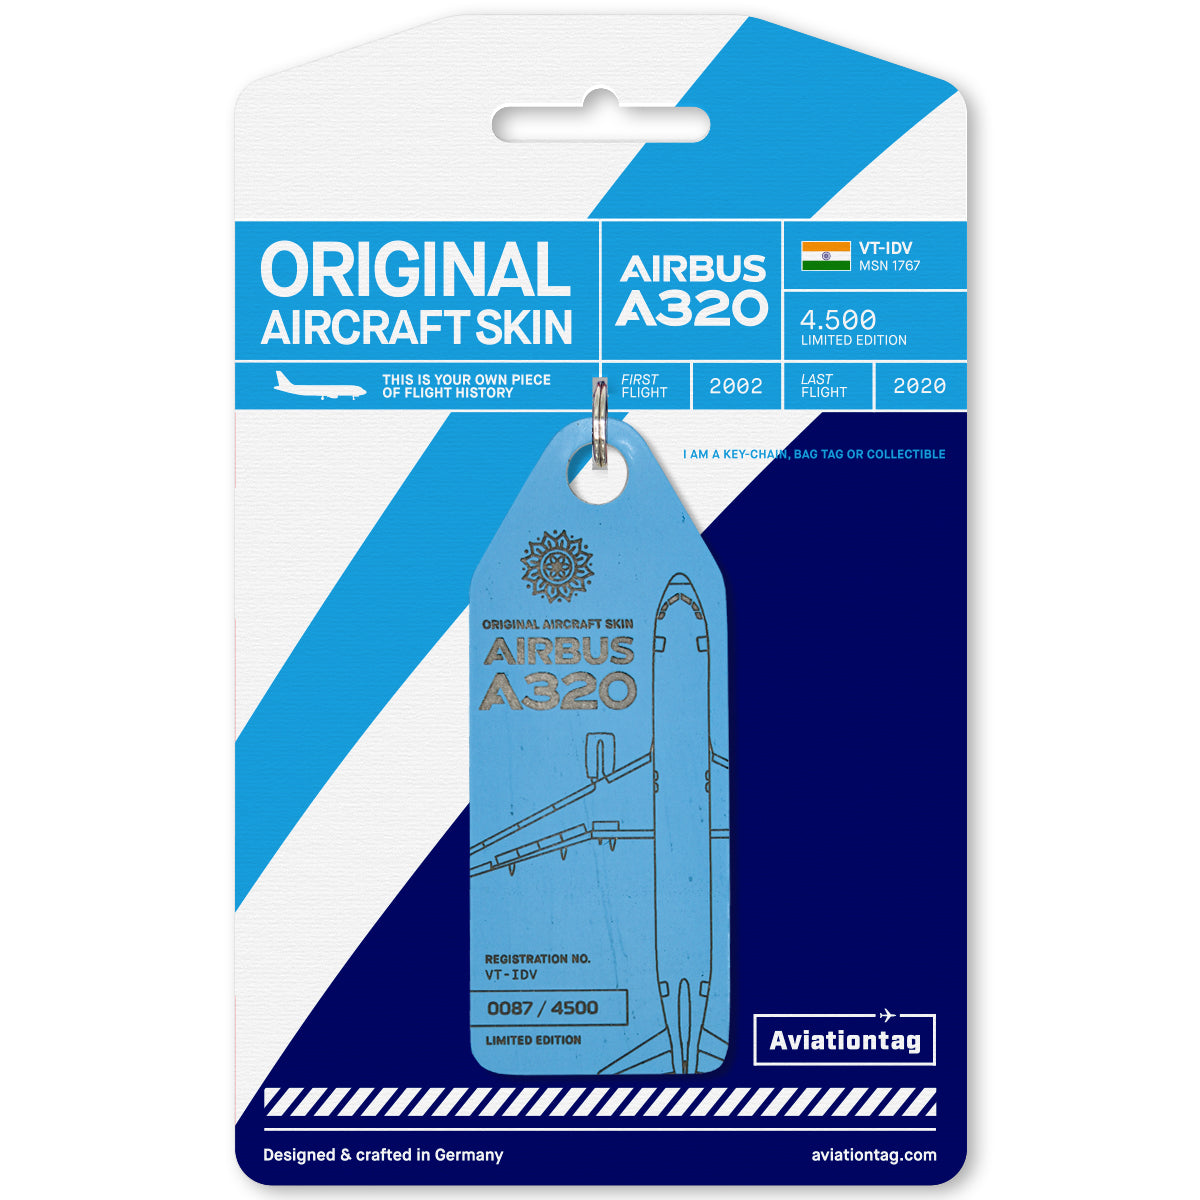 Aviationtag Airbus A320 VT-IDV Edition Collector Set